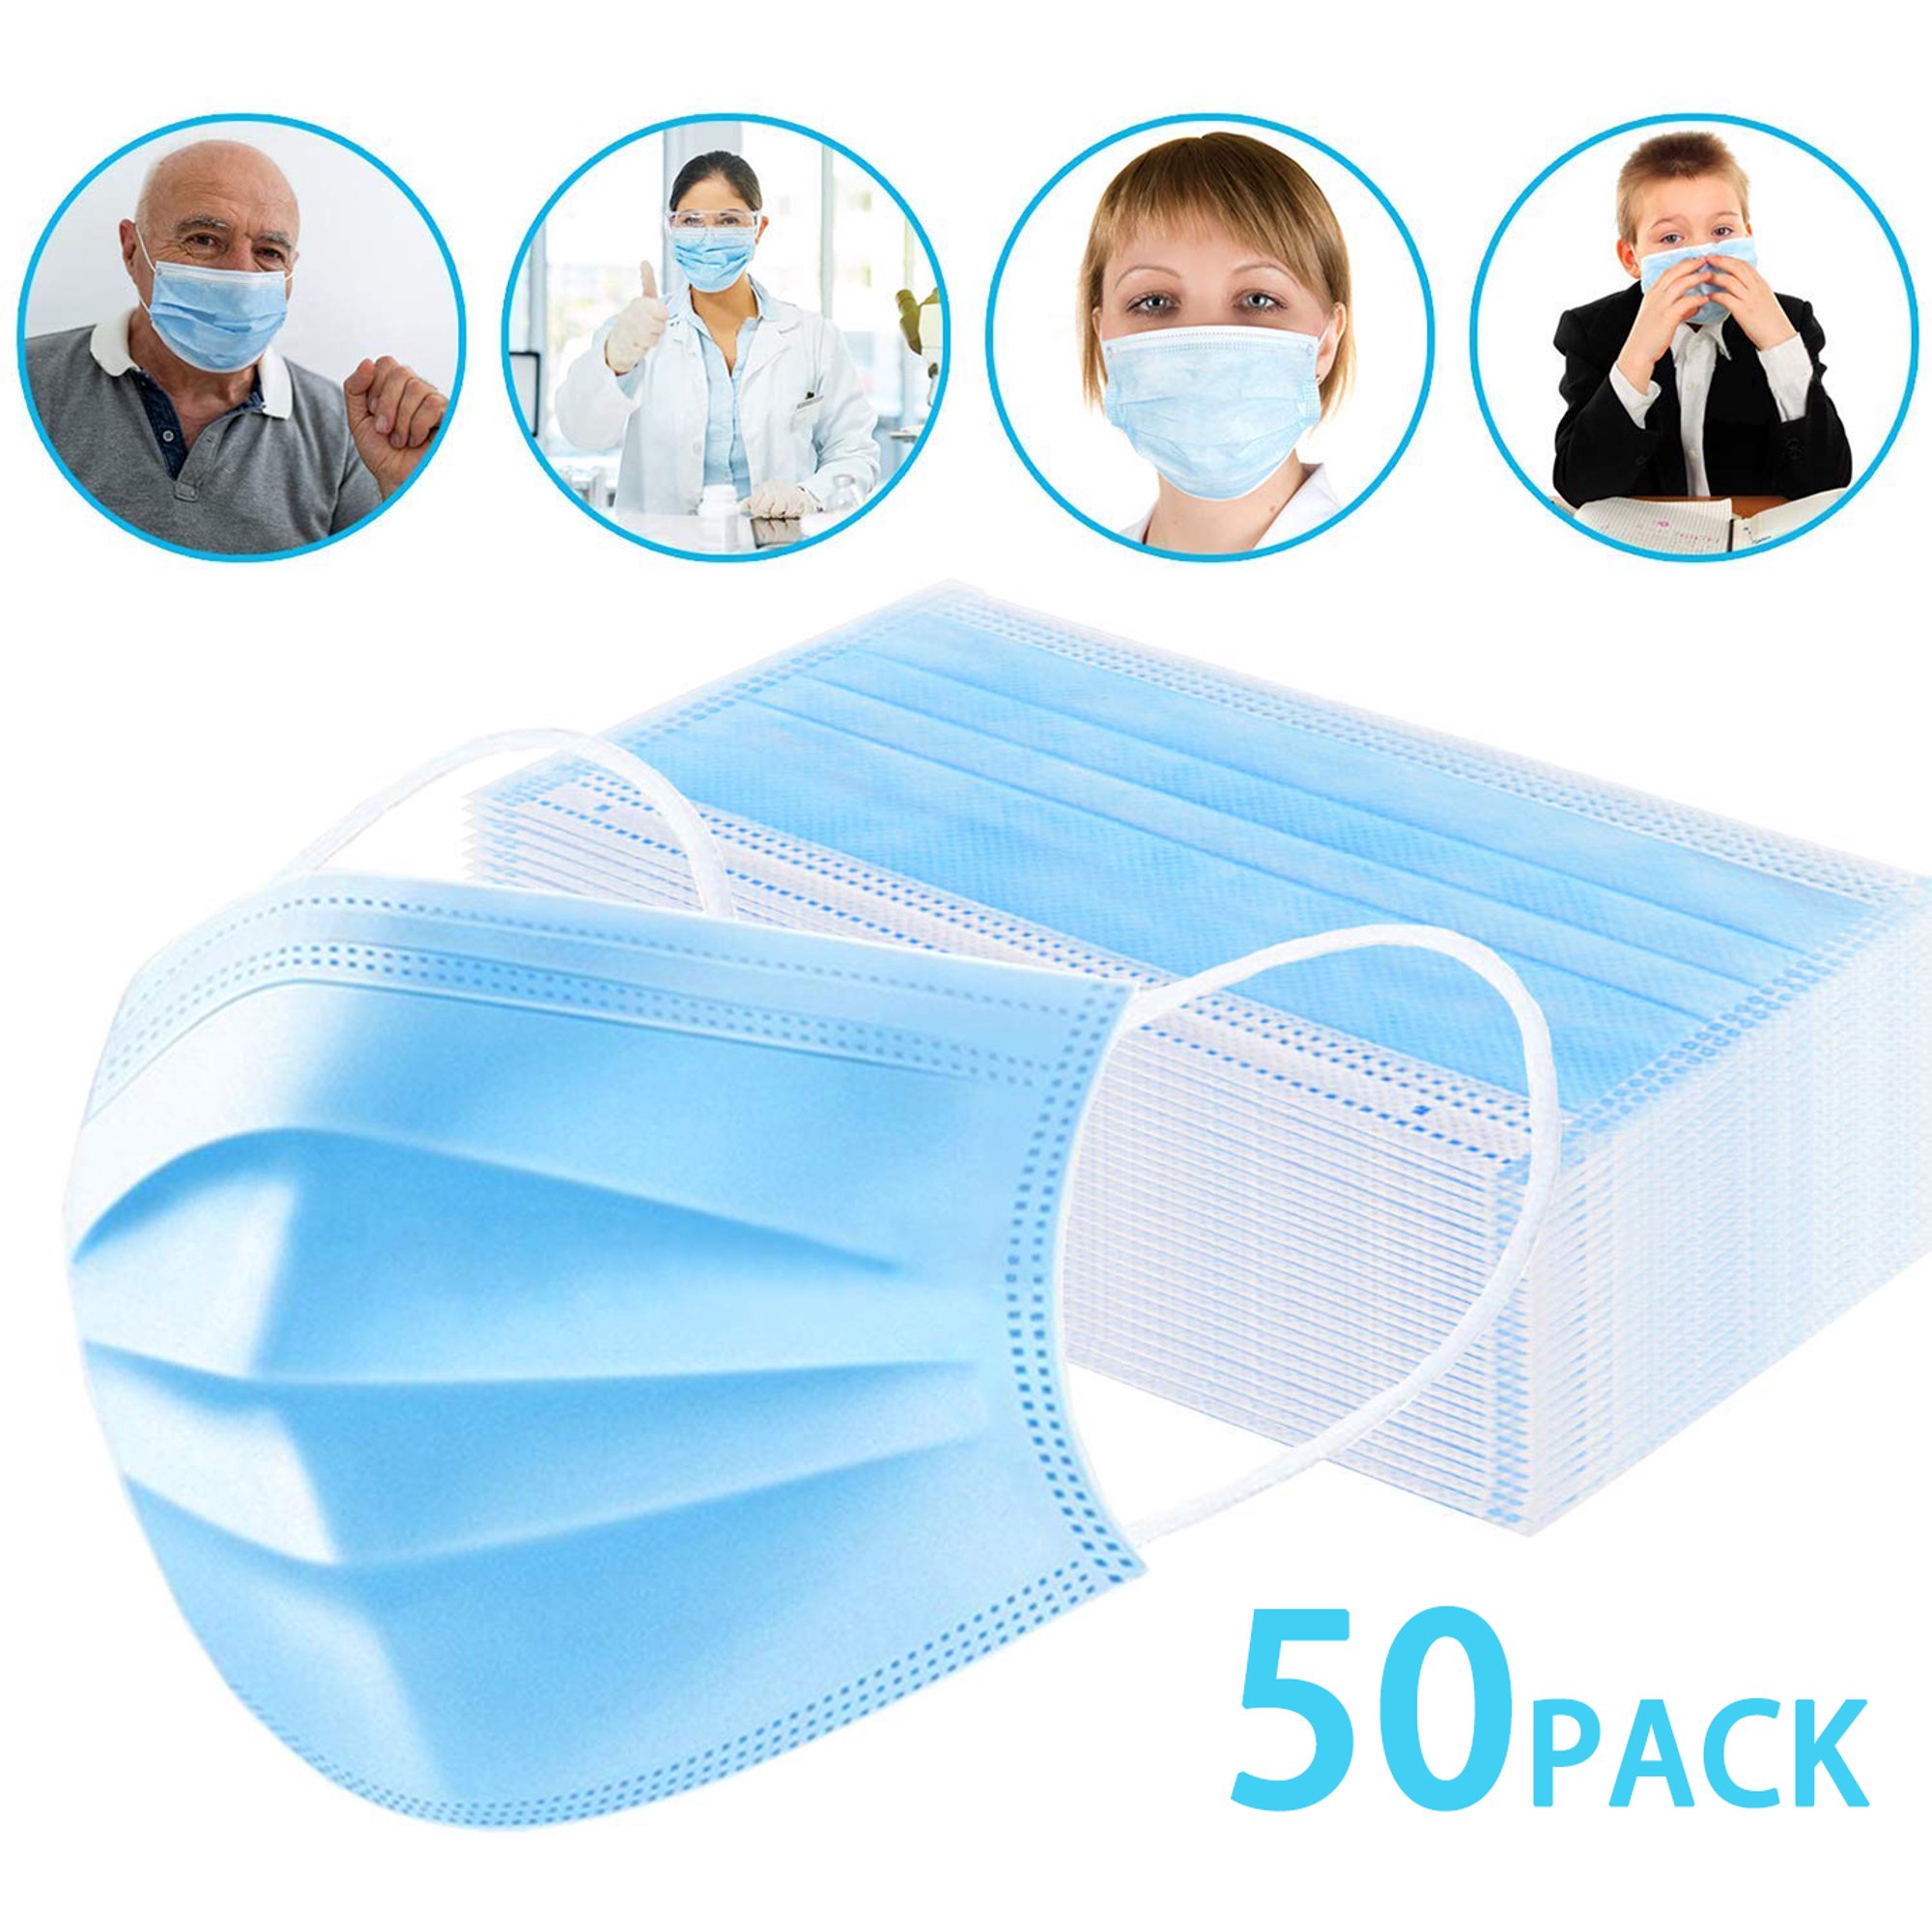 Surgical Face Mask for Wholesale in Dubai